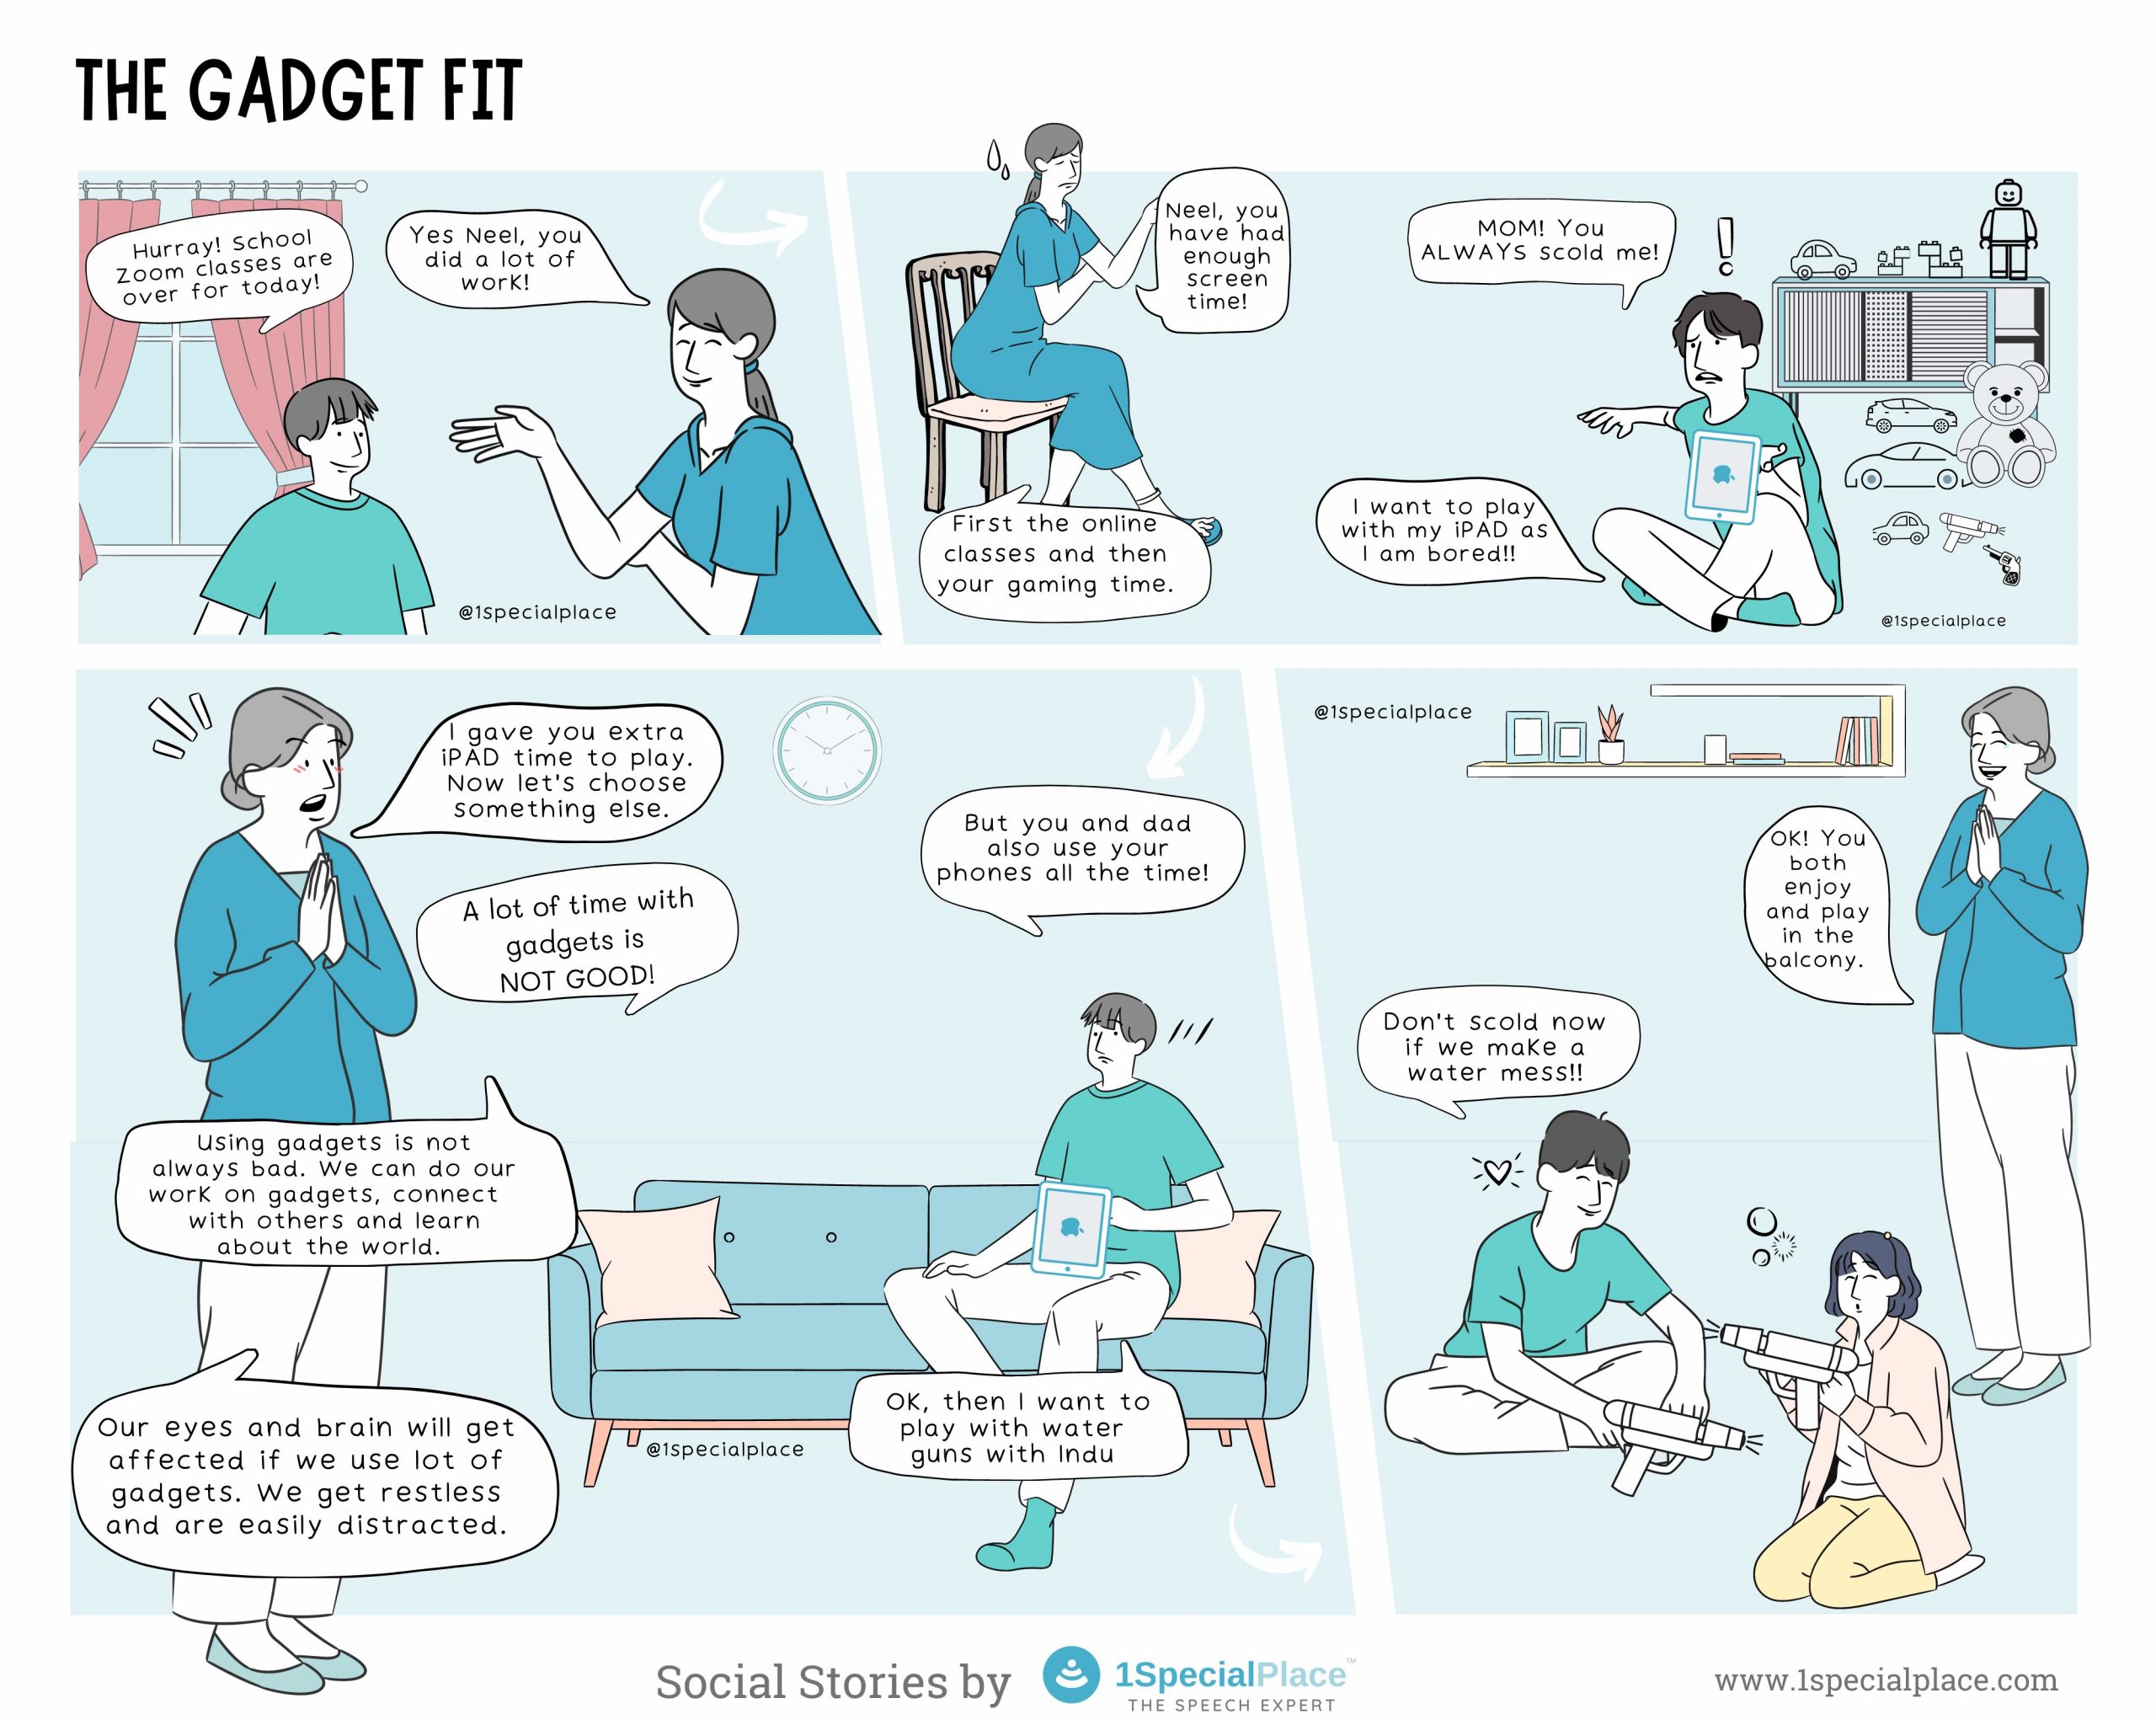 The Gadget Fit